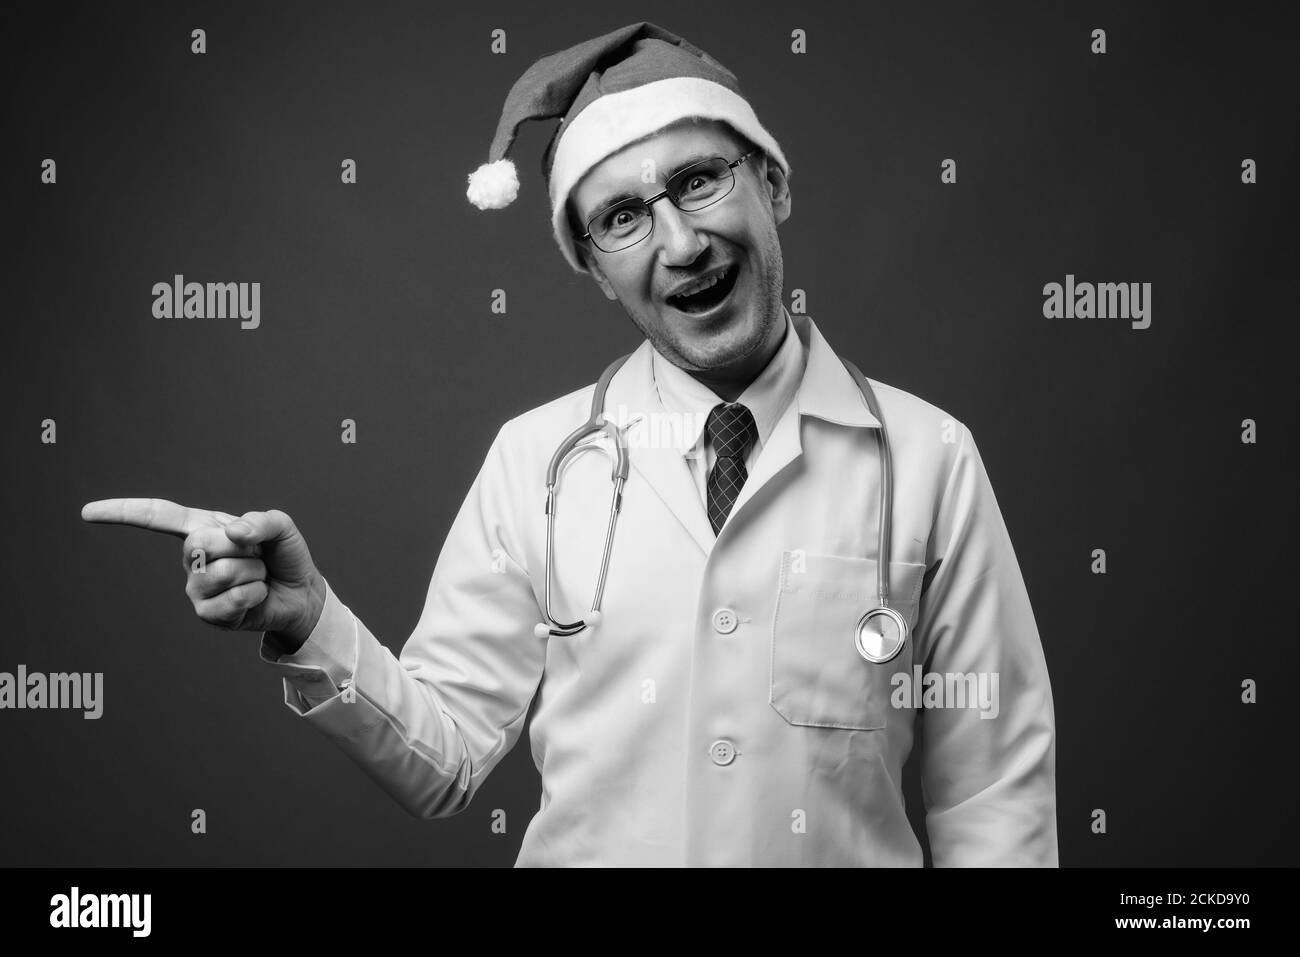 Portrait of man doctor with Santa hat ready for Christmas Stock Photo